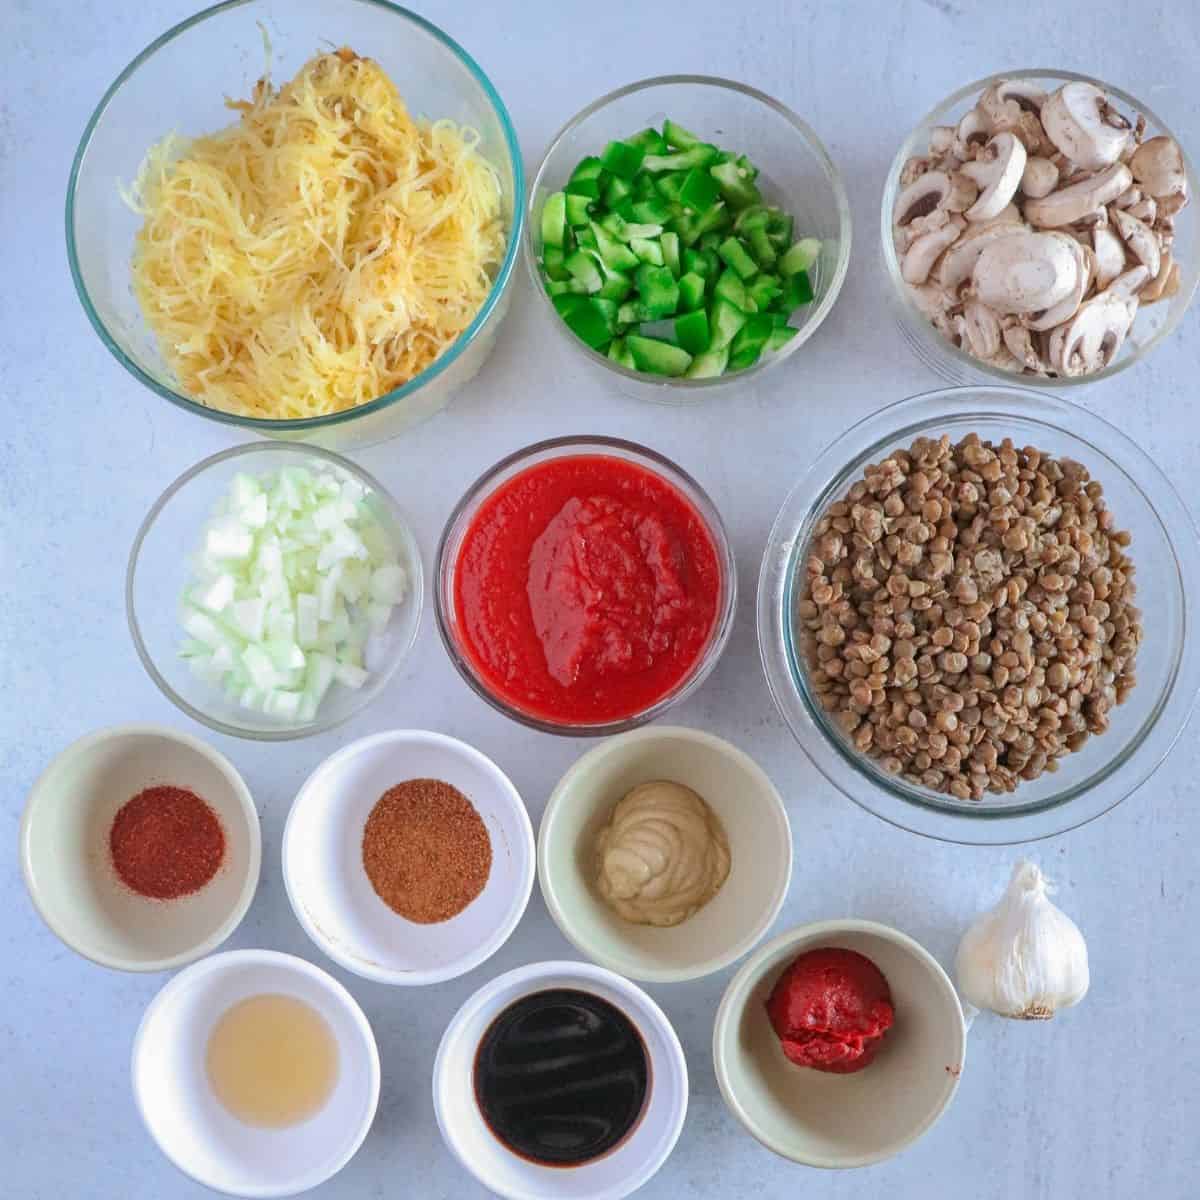 12 bowls of ingredients on white background